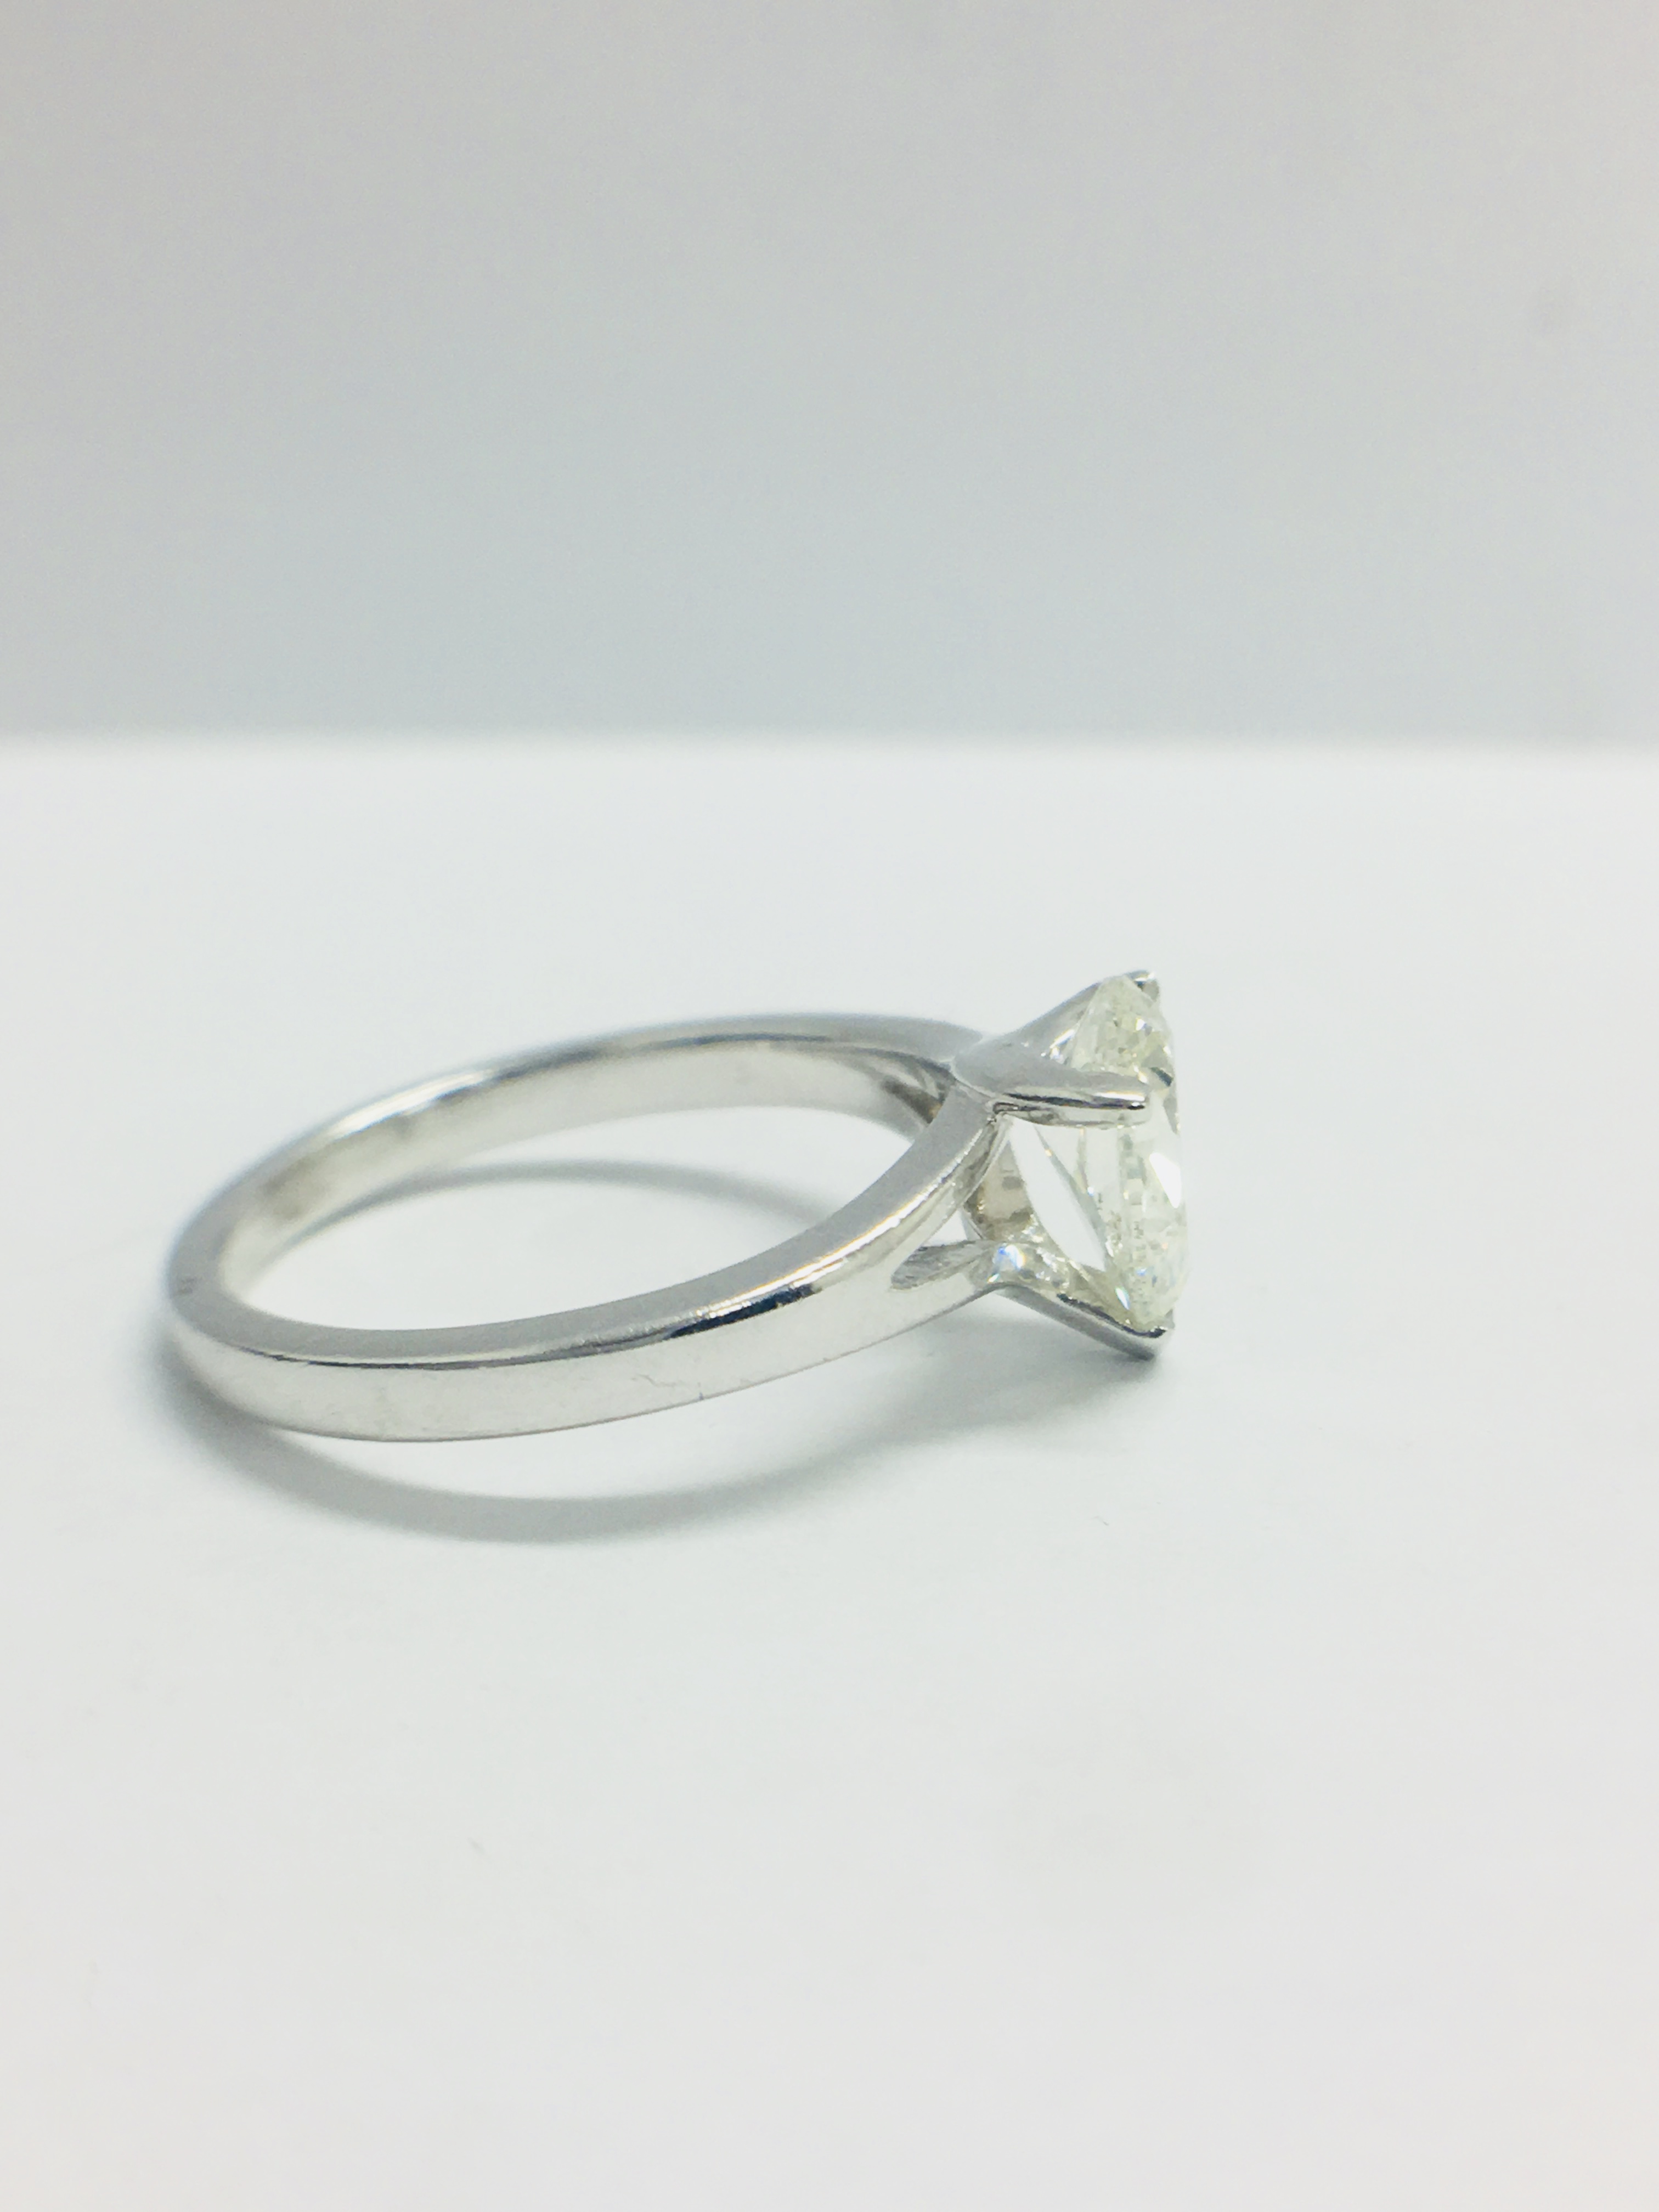 1.15Ct Pearshape Diamond Solitaire Ring, - Image 4 of 6